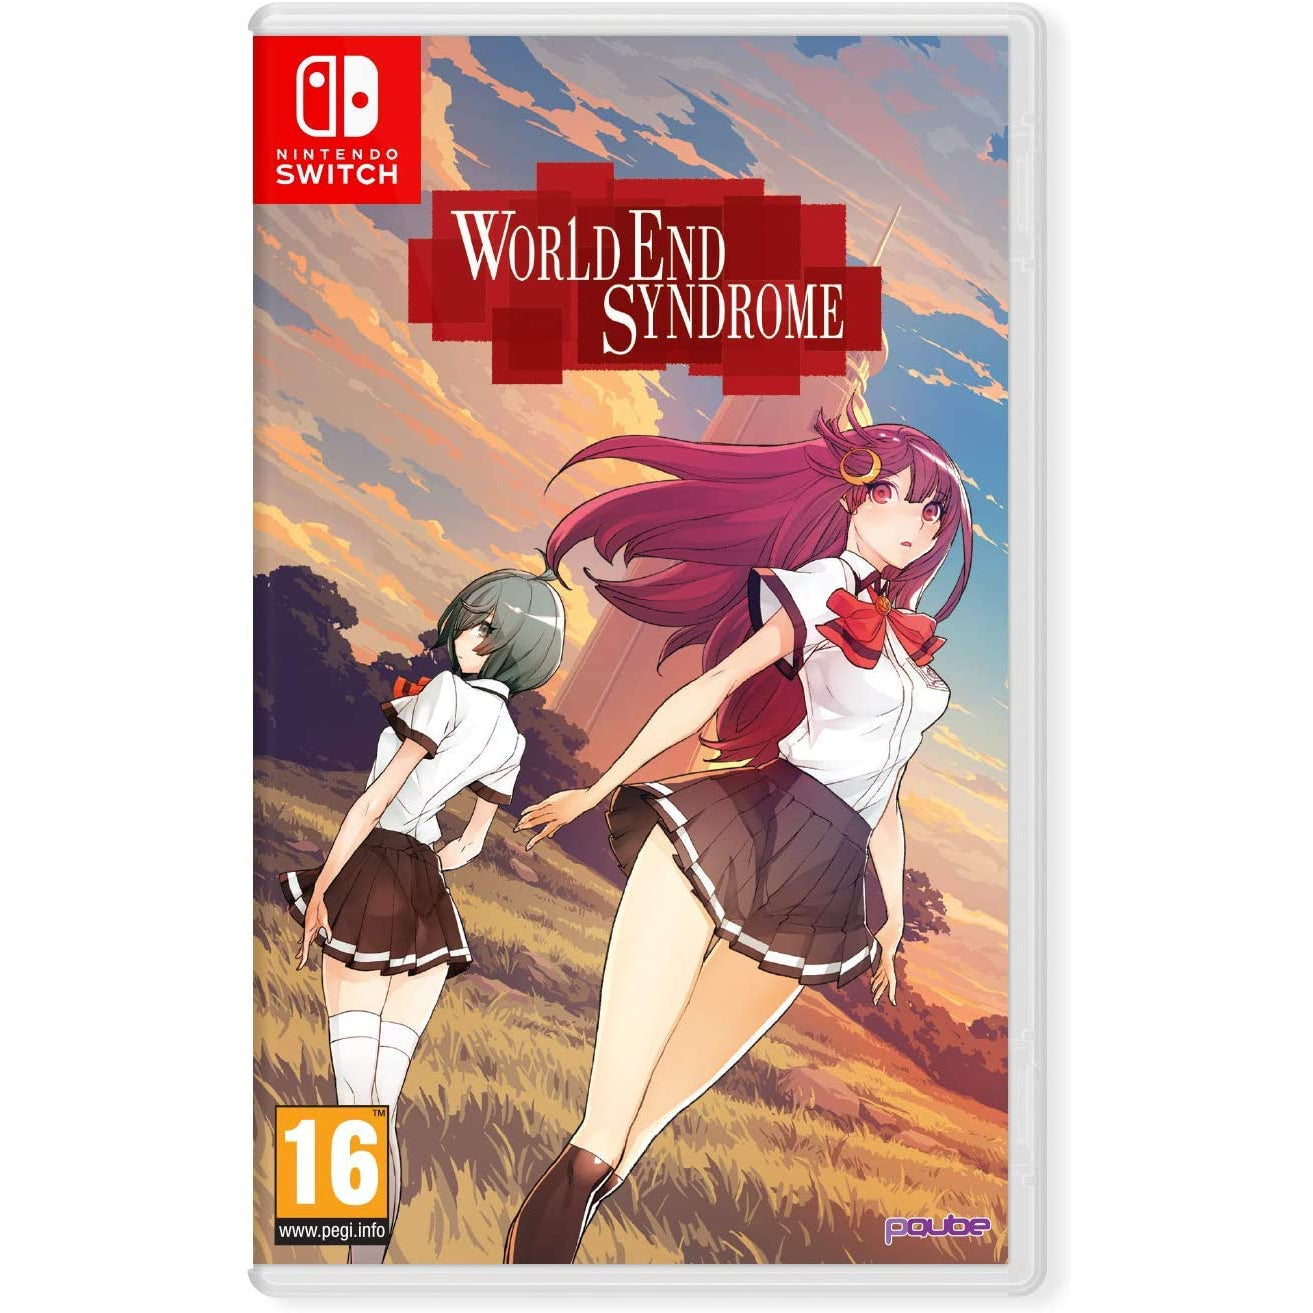 Worldend Syndrome (Nintendo Switch)